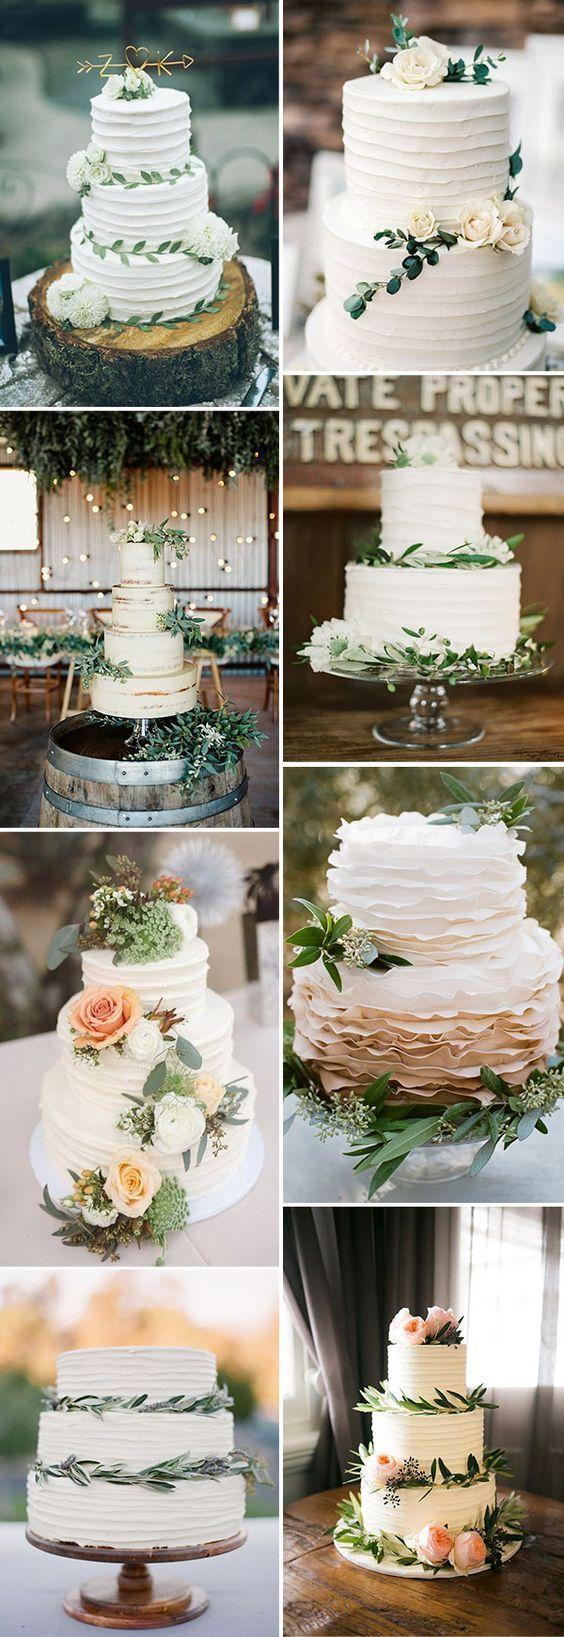 Mariage - 50 Steal-Worthy Wedding Cake Ideas For Your Special Day